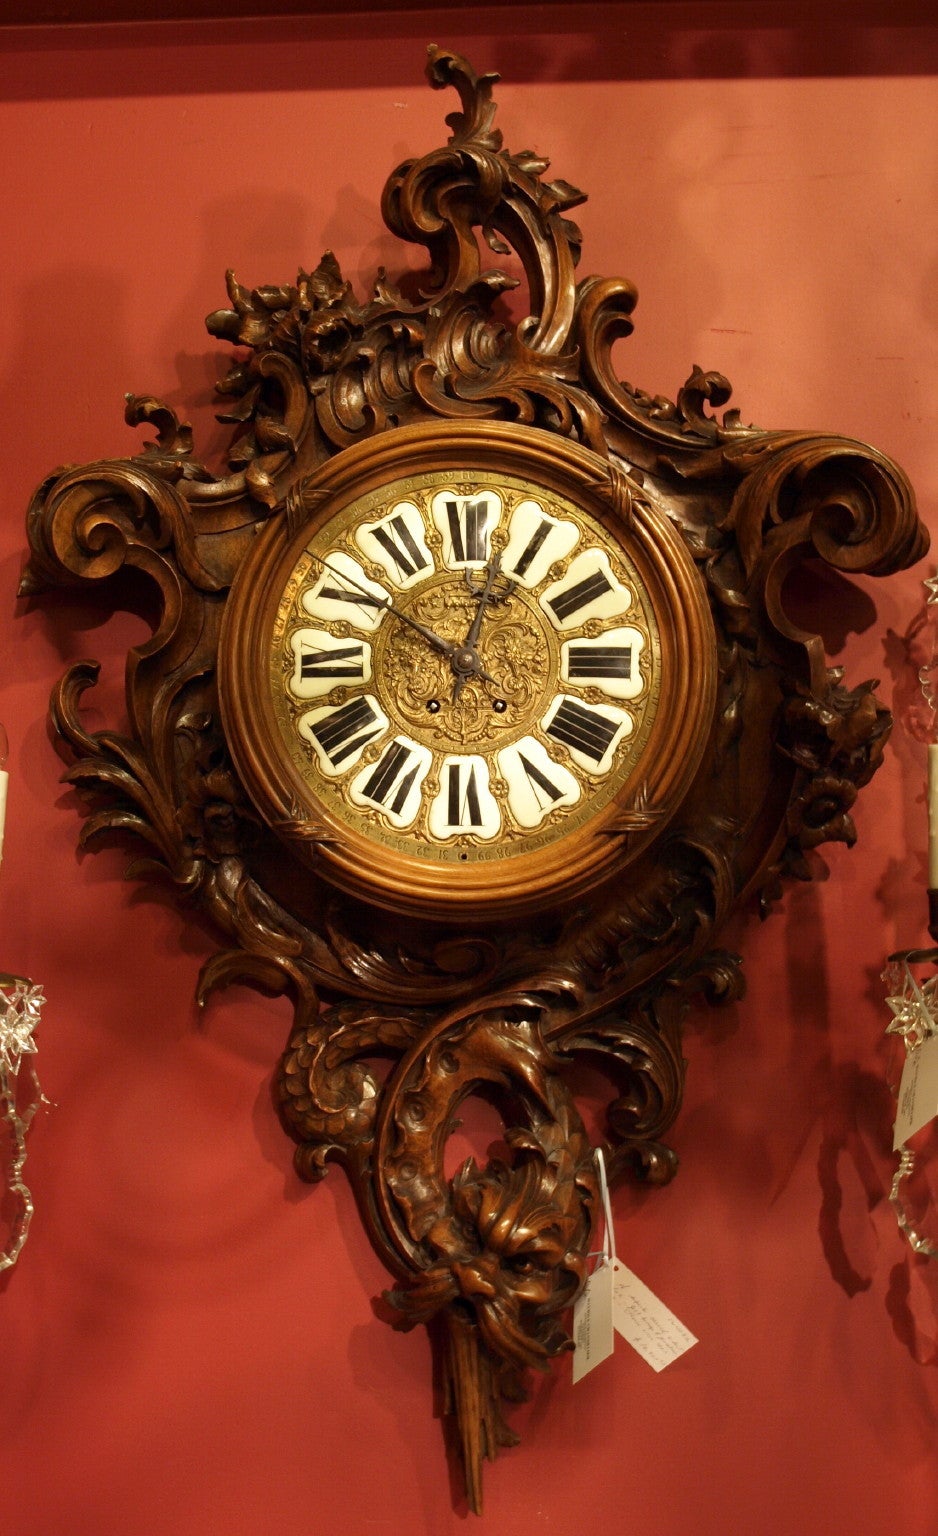 Incredibly carved walnut French wall clock, with face of bronze and porcelain, attributed to Gabriel - Frederick Viardot (1830-1906)
Furniture by Viardot is usually in the French Sino-Japanese manner that was the firms stock and trade. Their trading